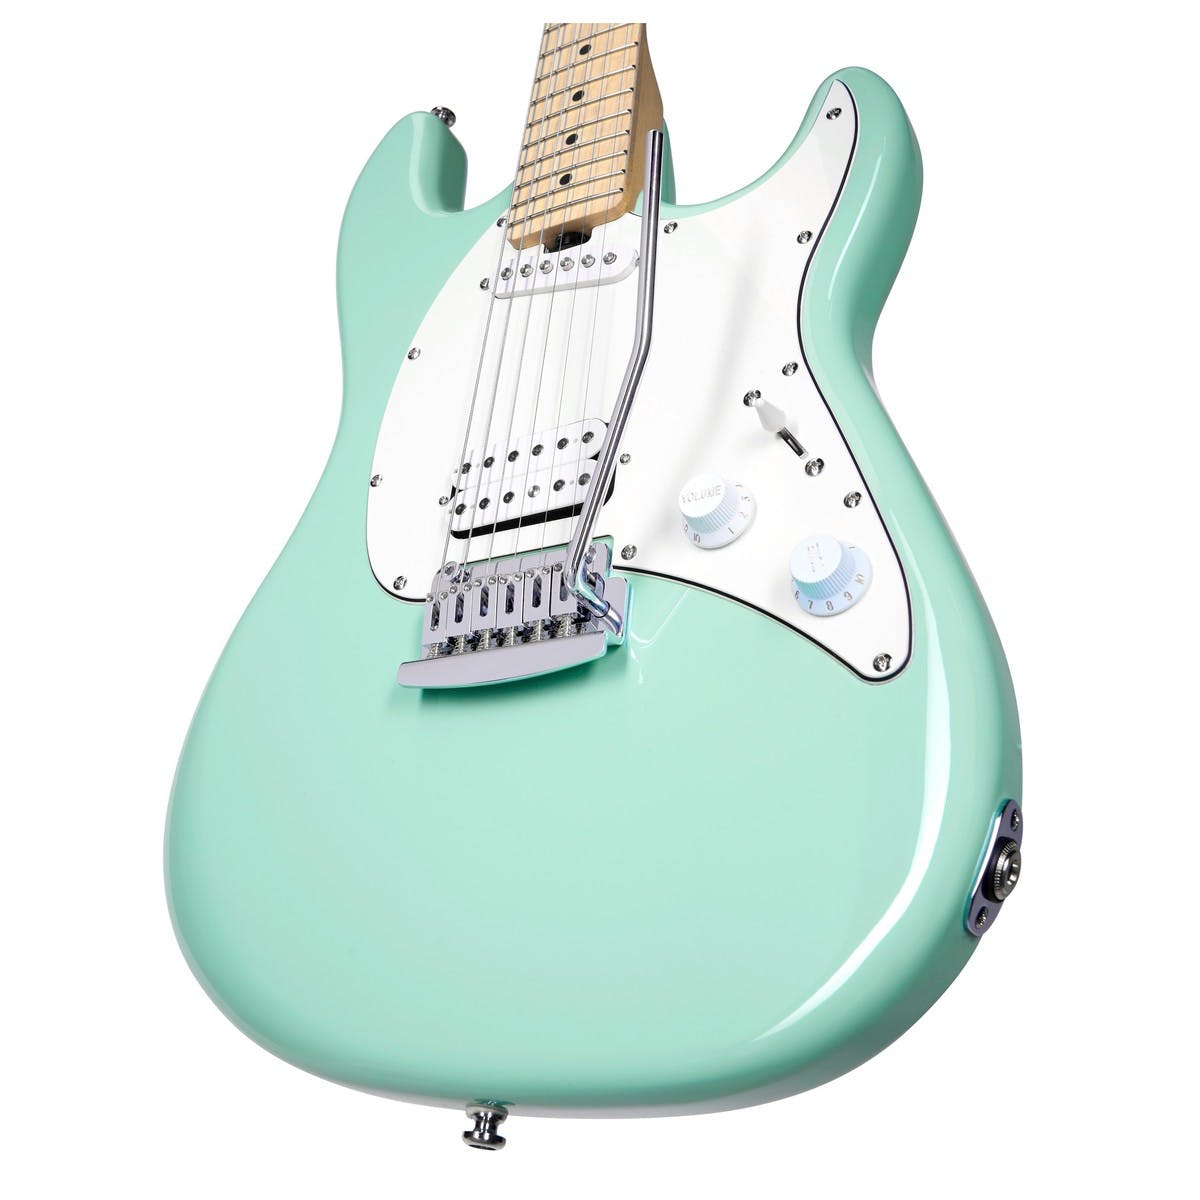 STERLING CTSS30HS CUTLASS ELECTRIC GUITAR SHORT SCALE MINT GREEN COLOR (CTSS-30HS/ CTSS 30HS), STERLING, ELECTRIC GUITAR, sterling-electric-guitar-ctss30hs-mg, ZOSO MUSIC SDN BHD